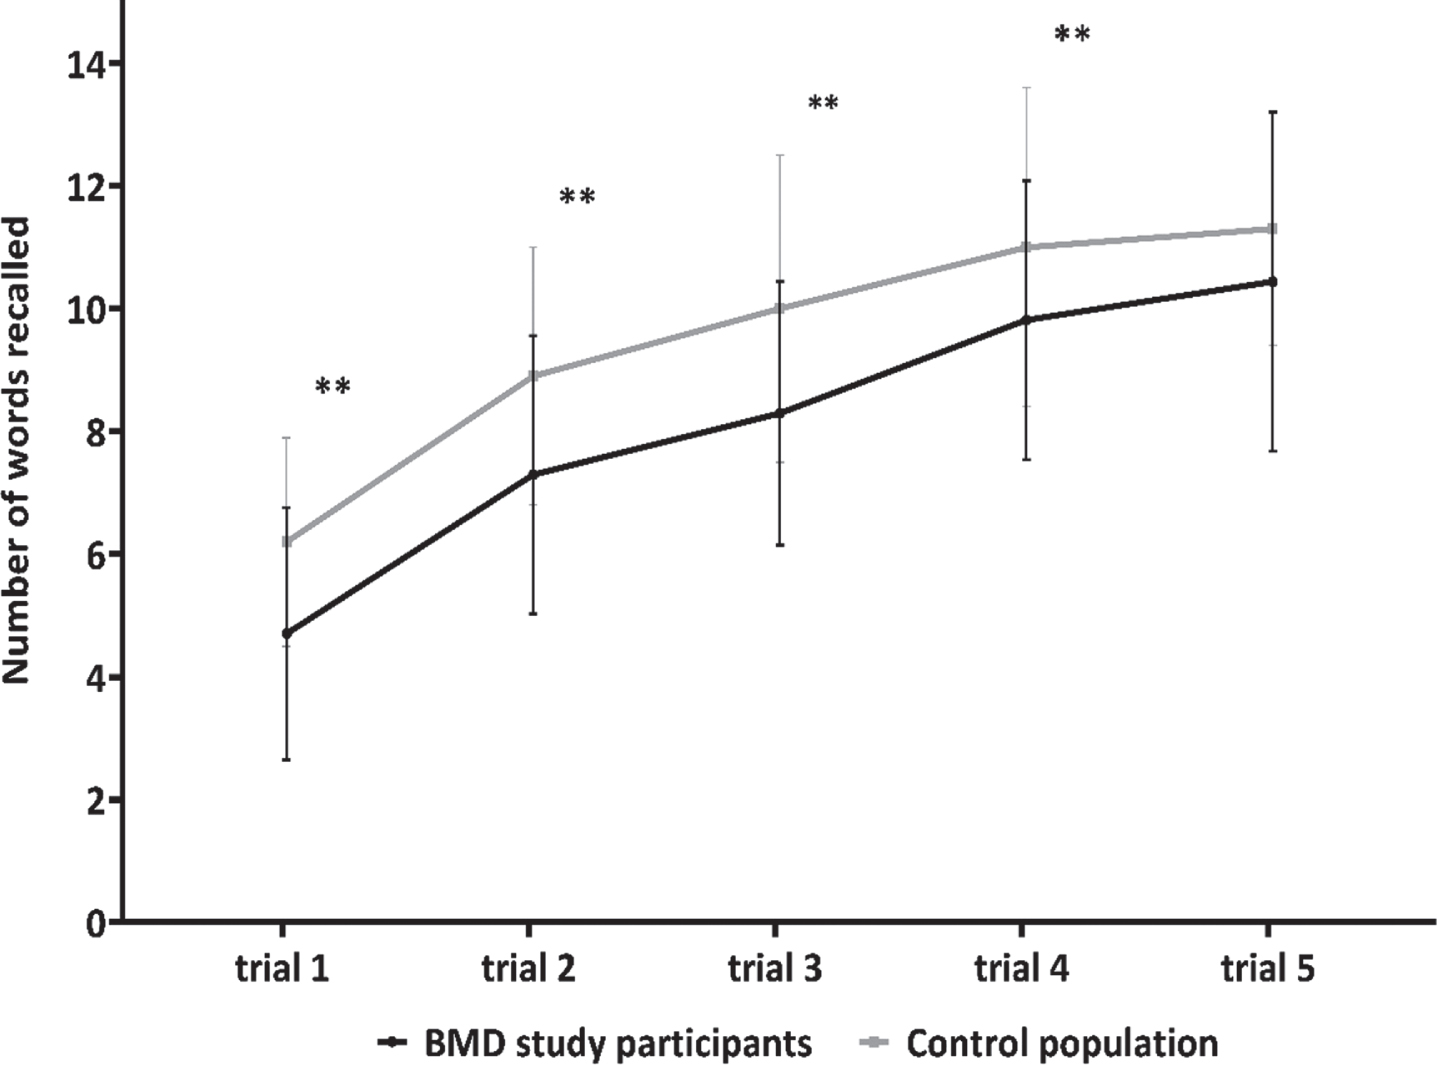 Verbal memory: immediate recall learning curve. The black line represents the mean amount of words (with error bars) recalled per trial of BMD study participants (N = 28). The grey line represents the mean amount of words (with error bars) recalled per trial for a norm population (N = 41).